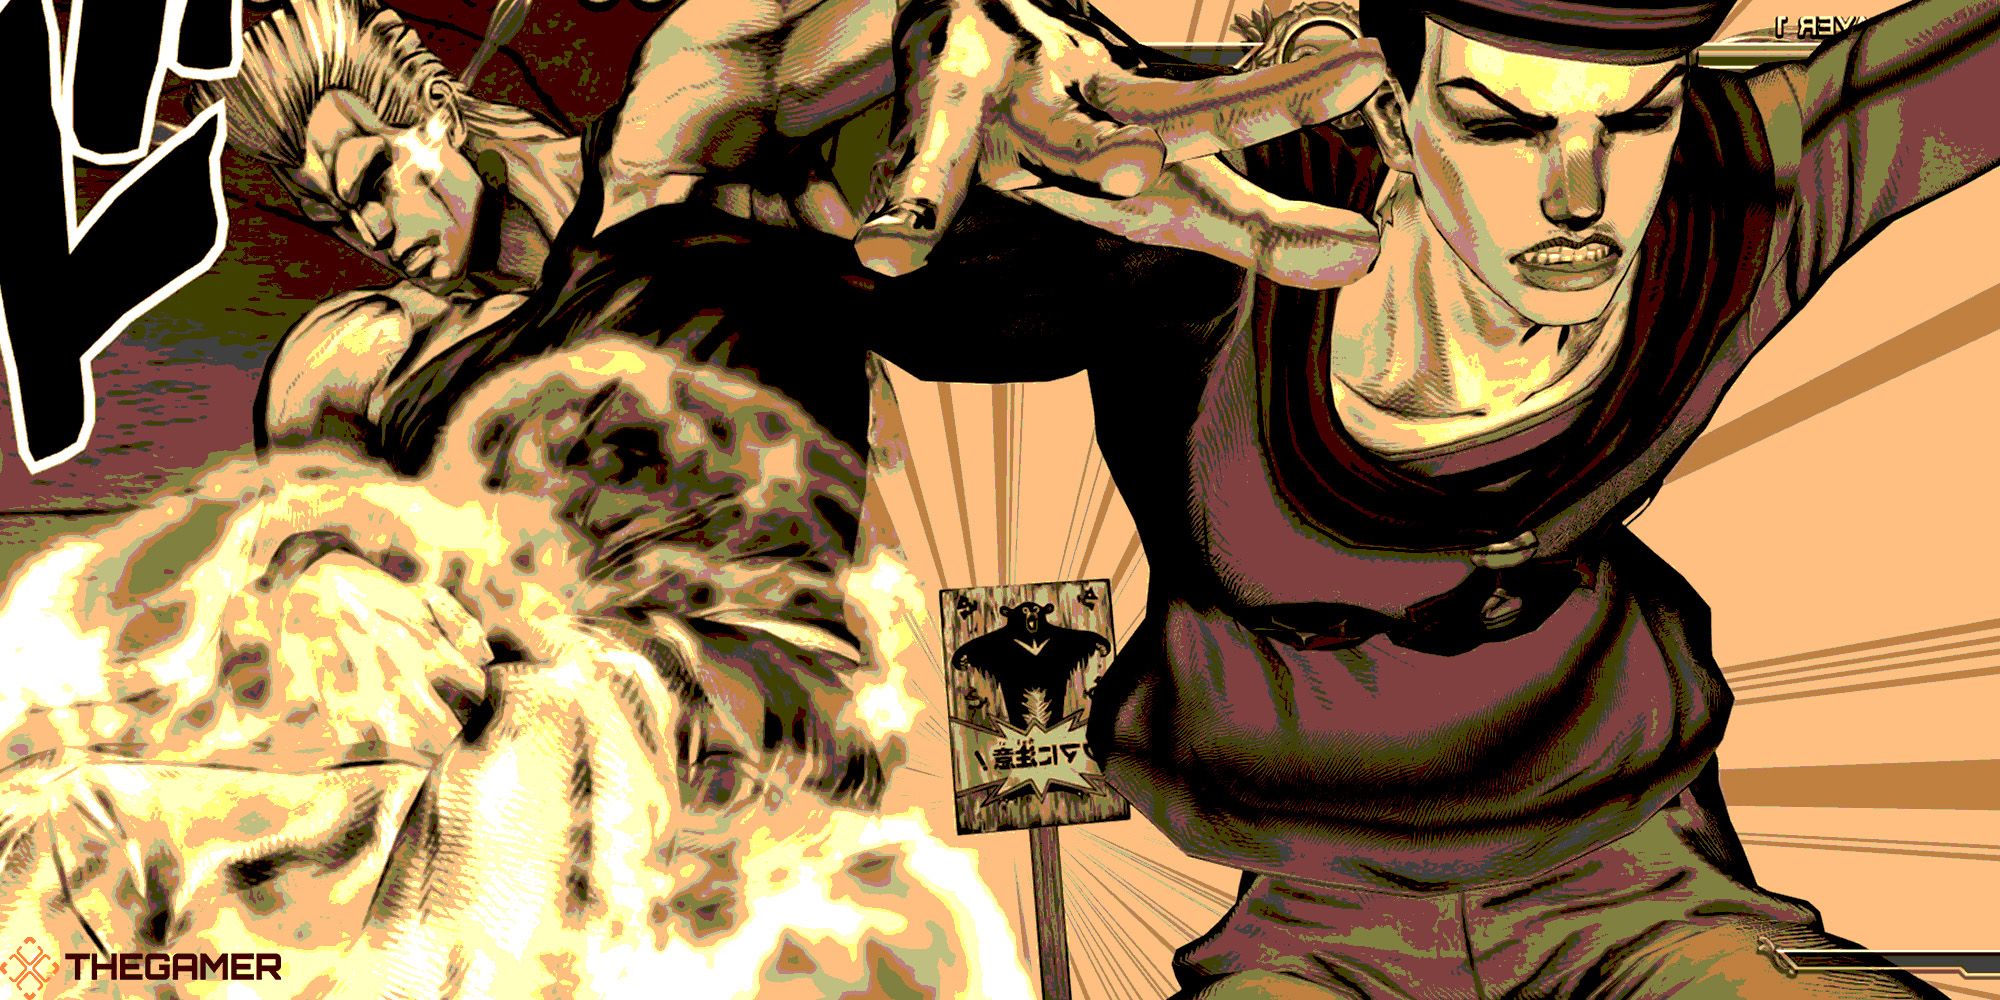 A sepia-toned image with Polnareff crushed into a water tower on the right and Josuke (8) getting hurled into a sign on the left. Custom image for JoJo's Bizarre Adventure: ASBR.